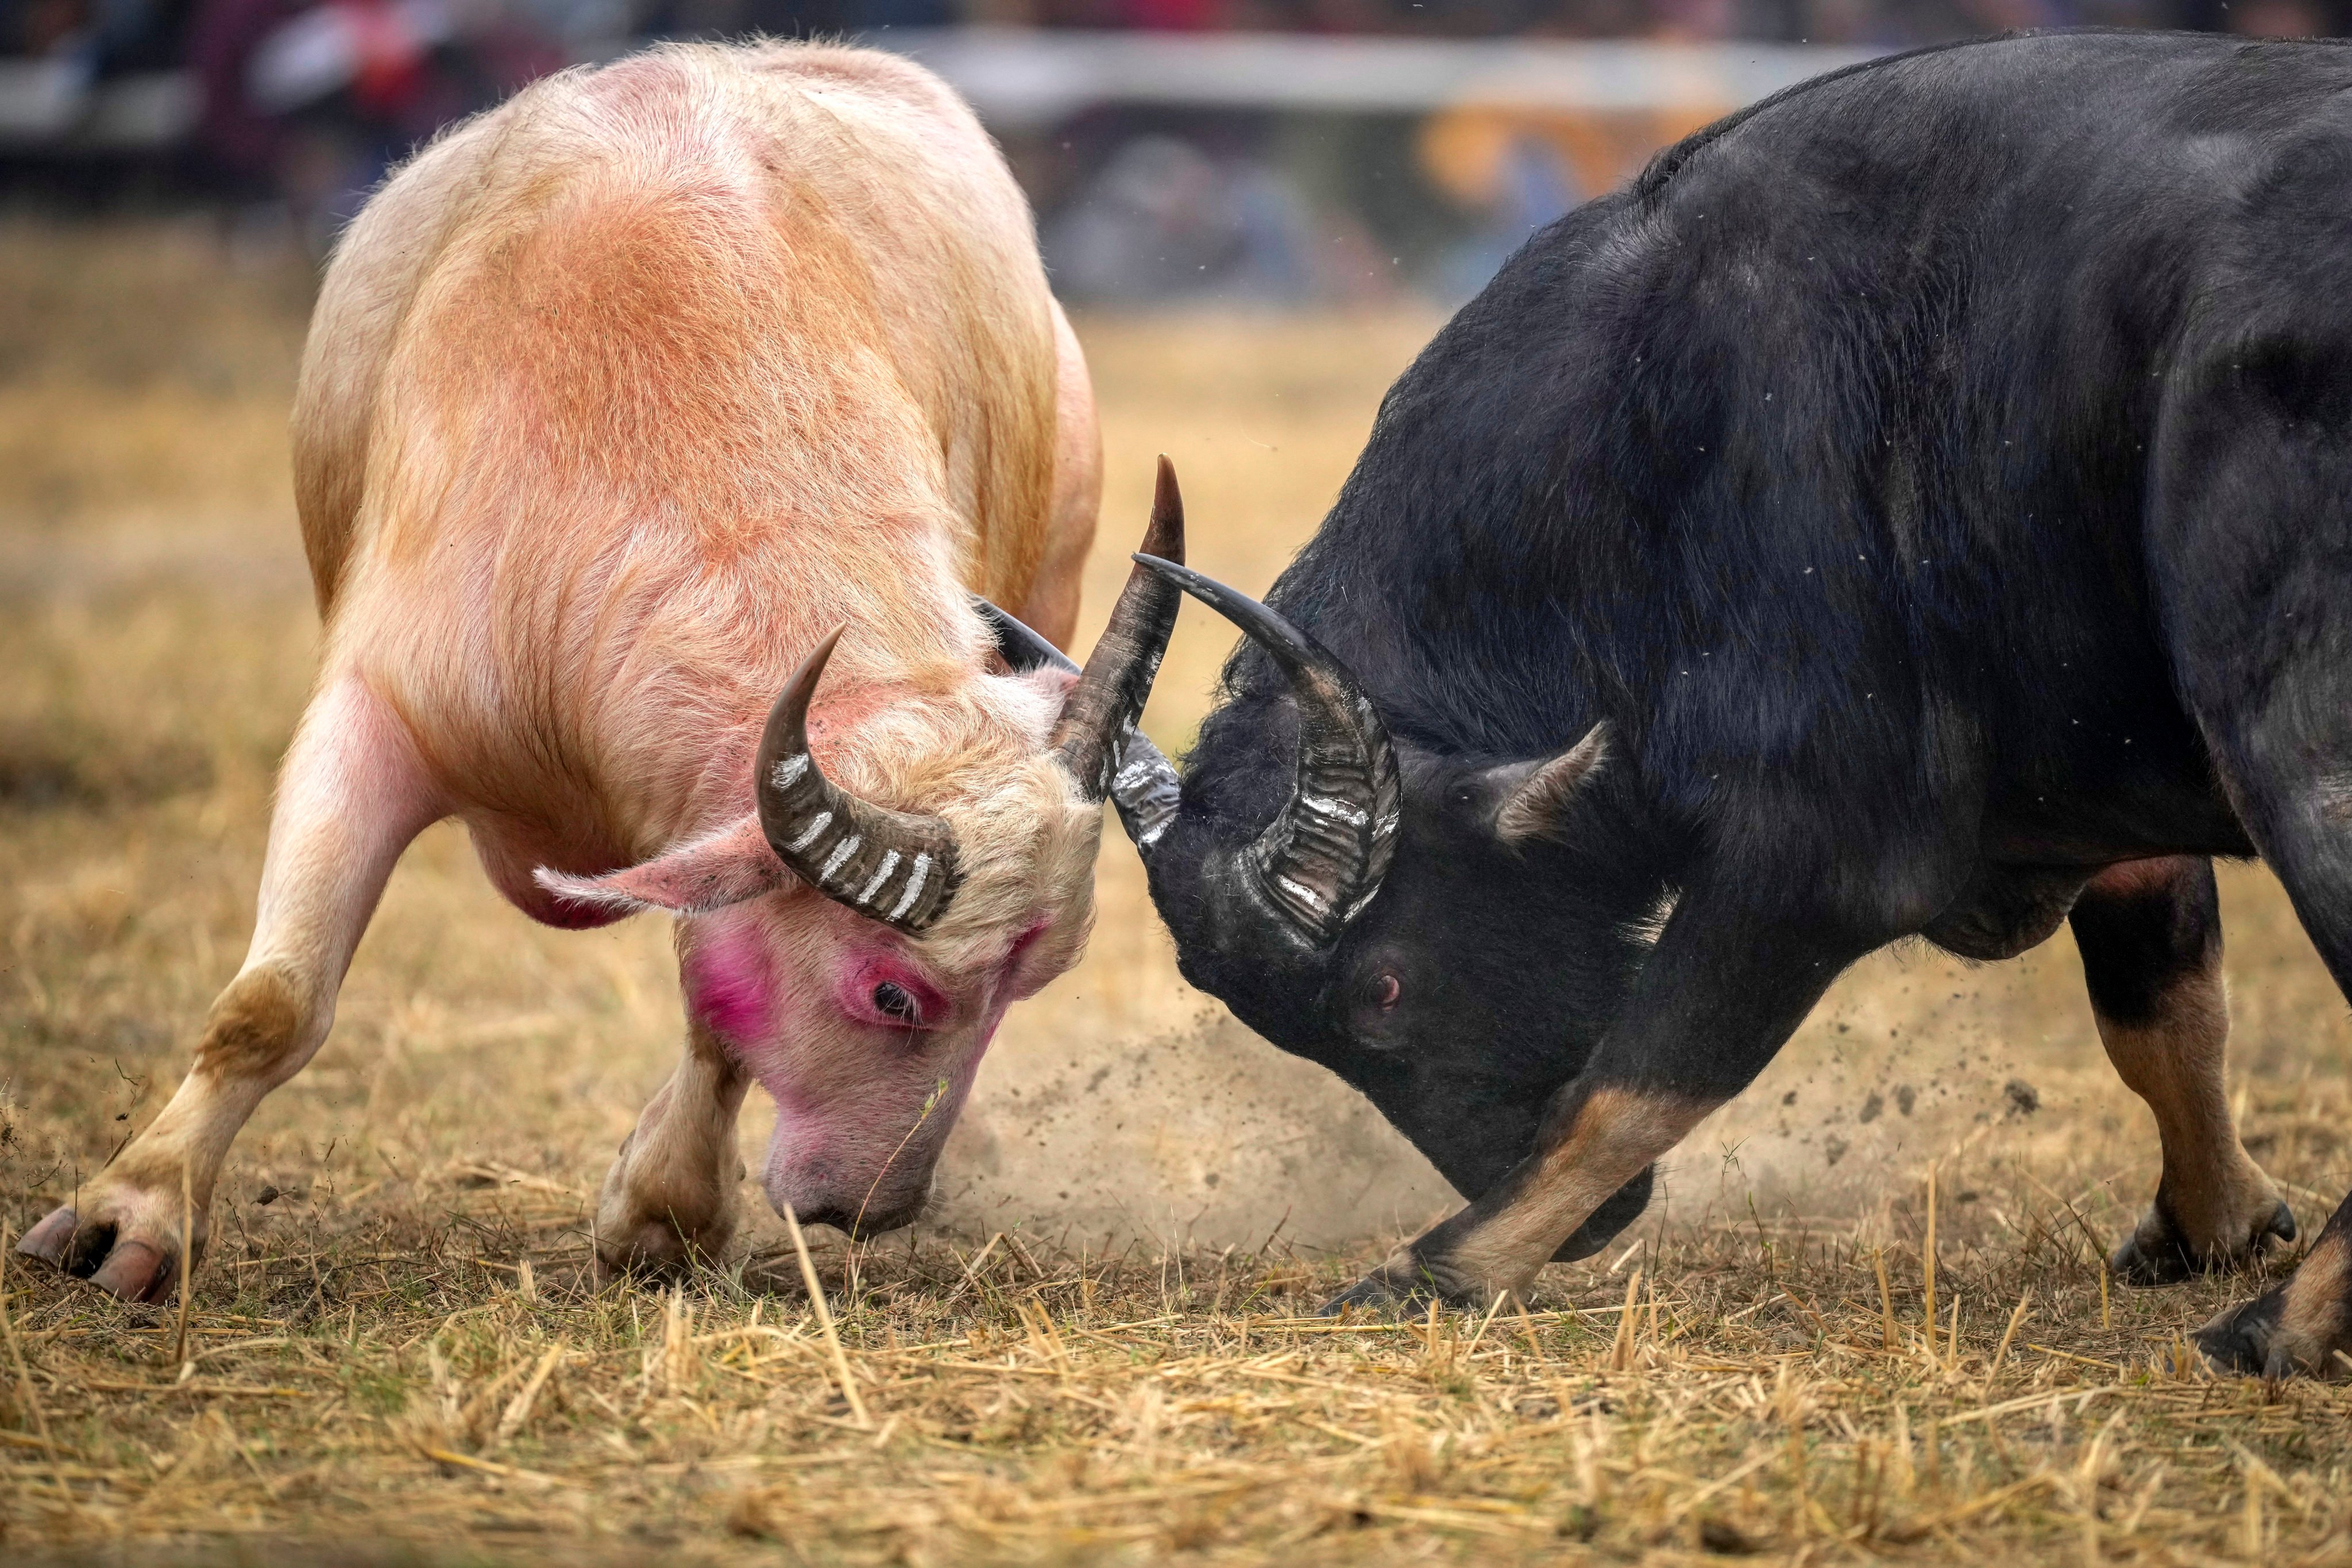 Buffaloes lock horns during a fight in Assam, India. Photo: AP